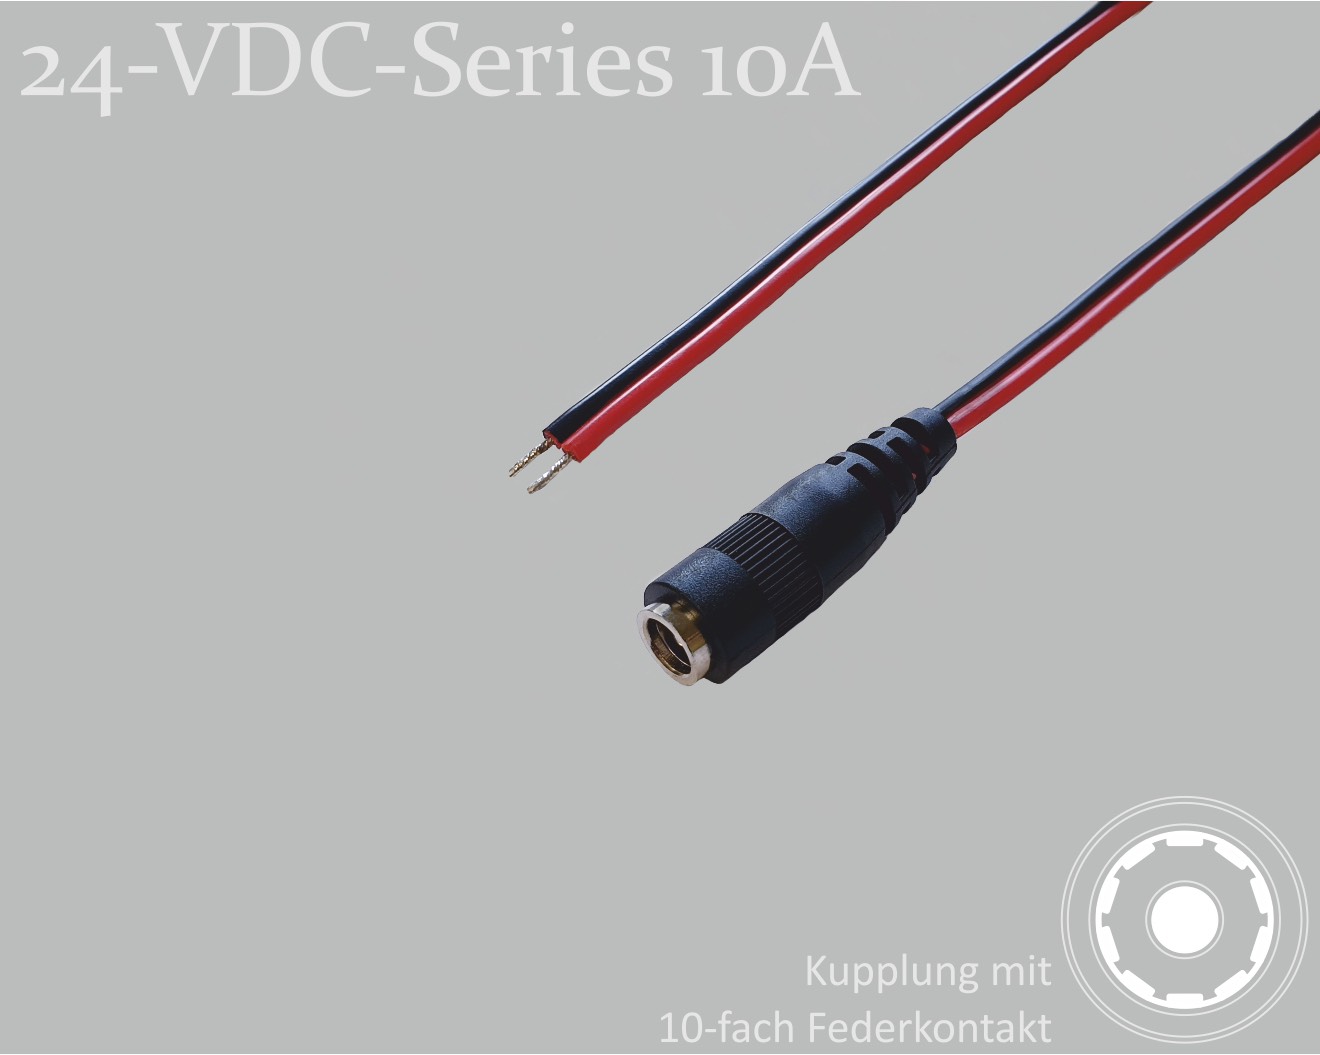 24-VDC-Series 10A, DC connection cable, DC coupling with 10-spring contact 2.5x5.5mm, flat cable 2x0.75mm², red/black, tinned ends, 1.5m